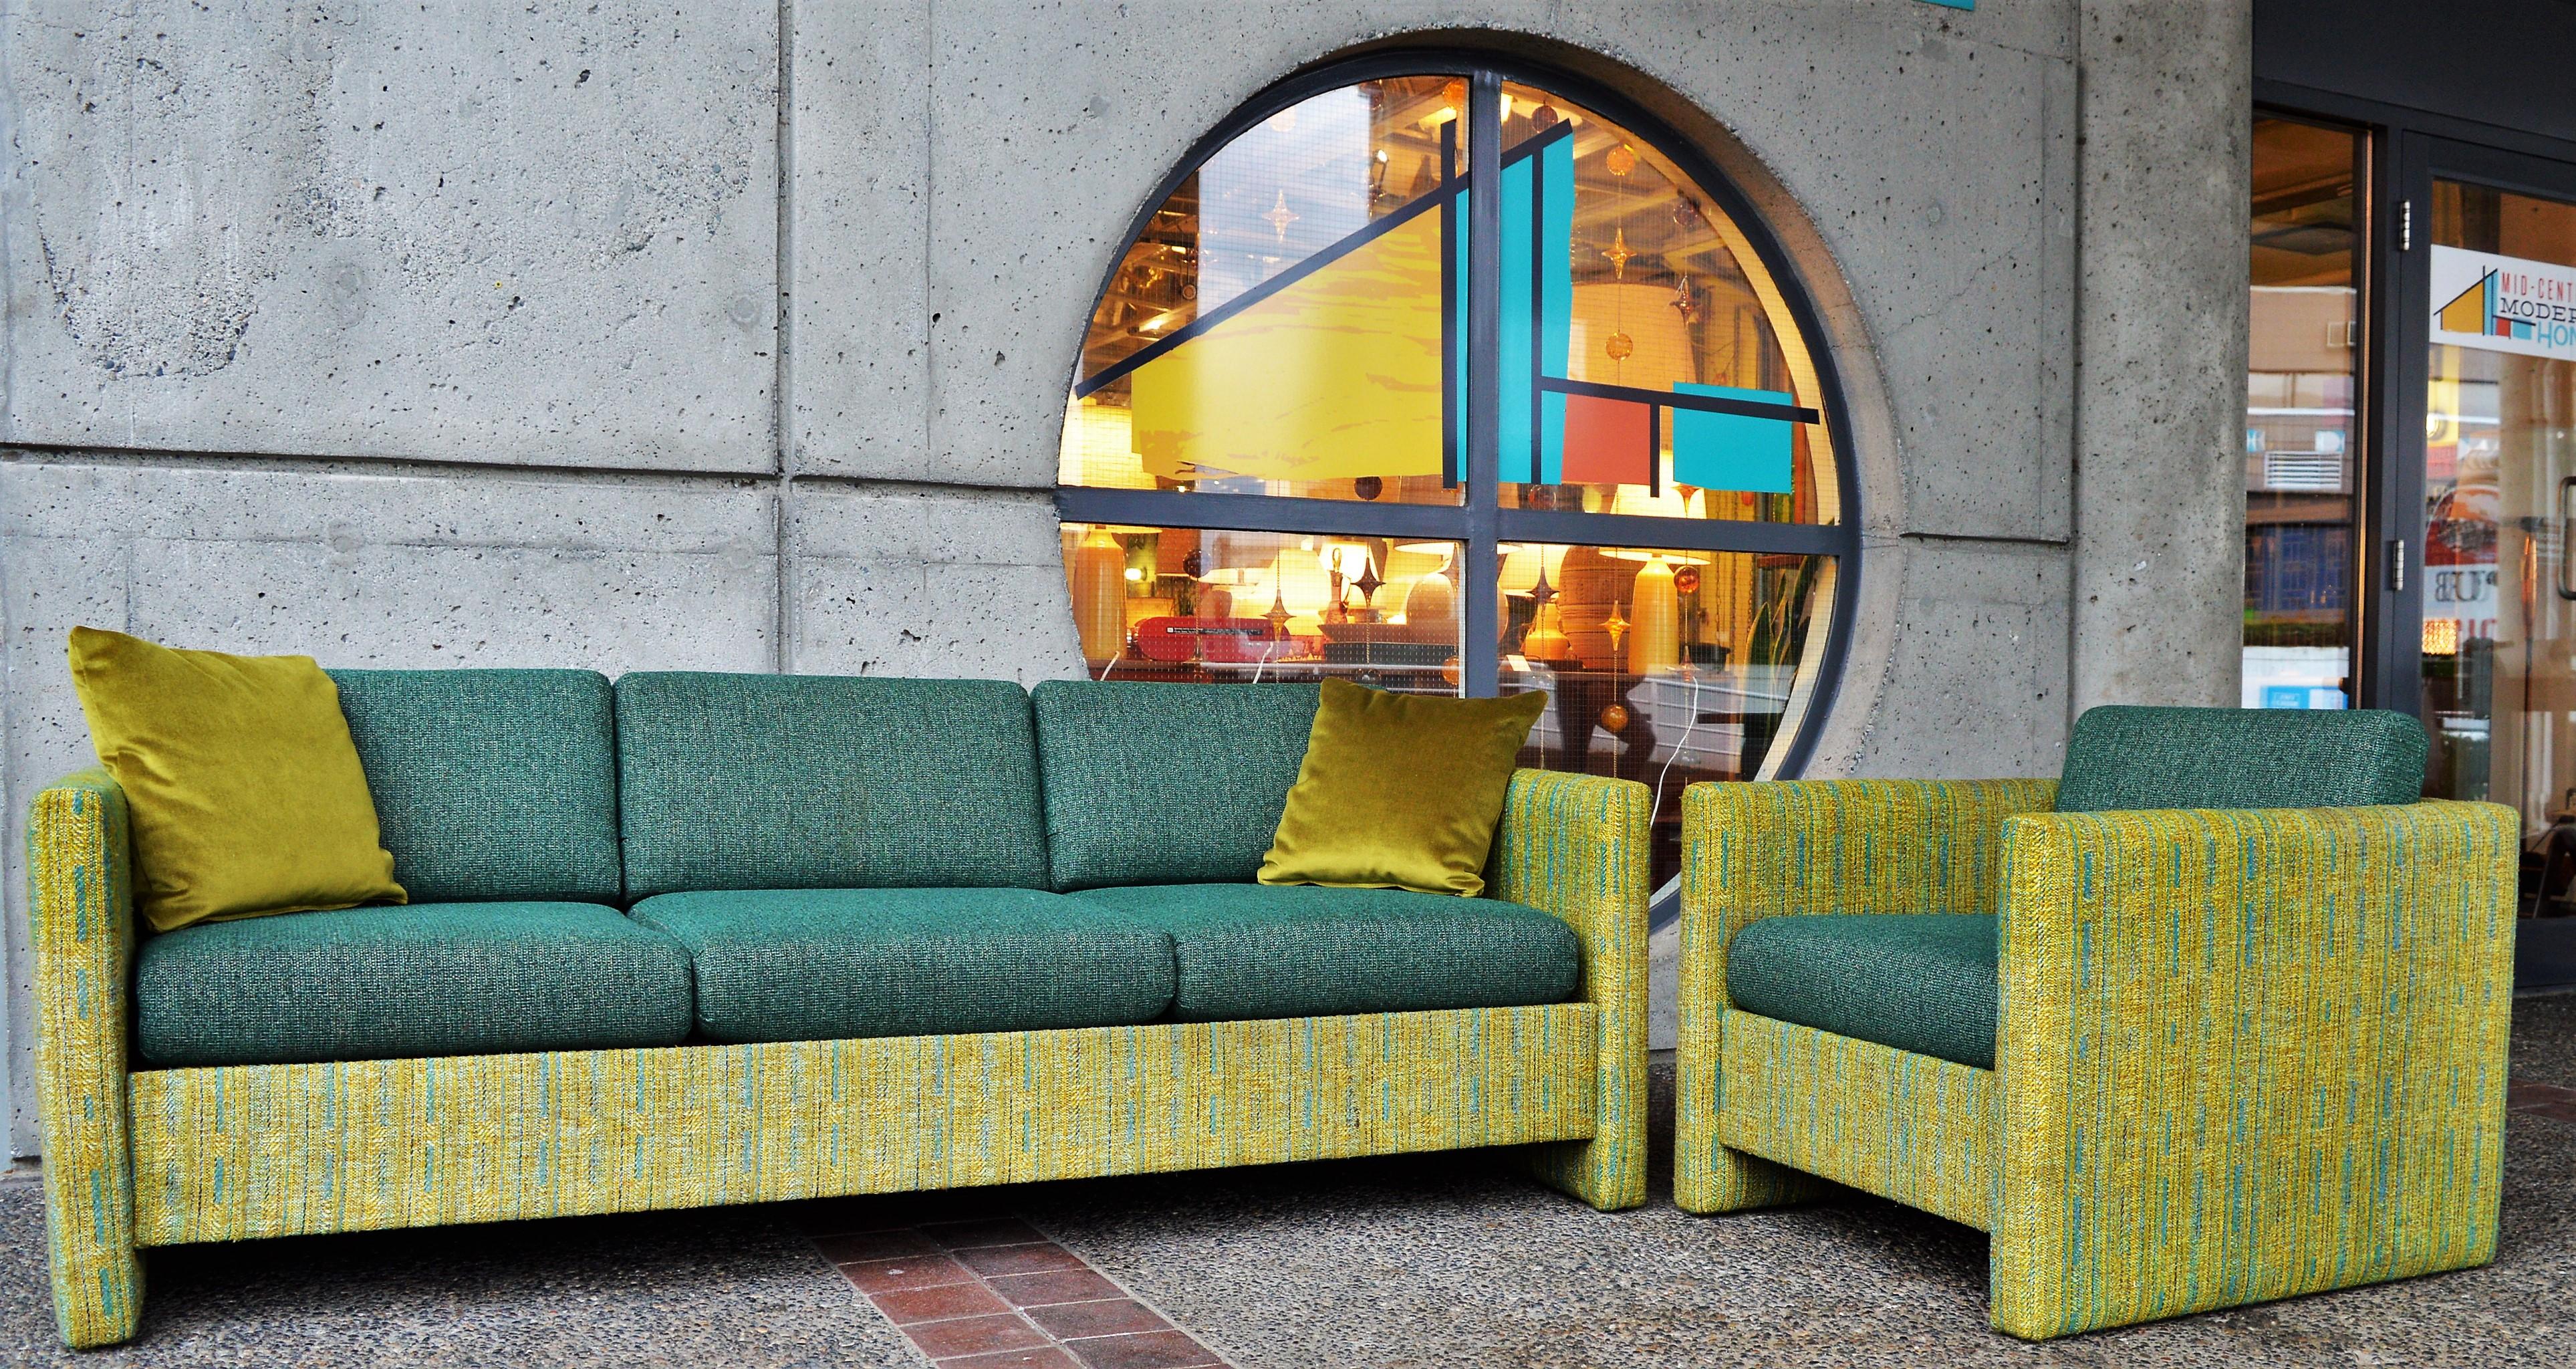 Mid-Century Modern Midcentury Sofa and Club Chair in Teal Wool Cushions with Contrasting Print